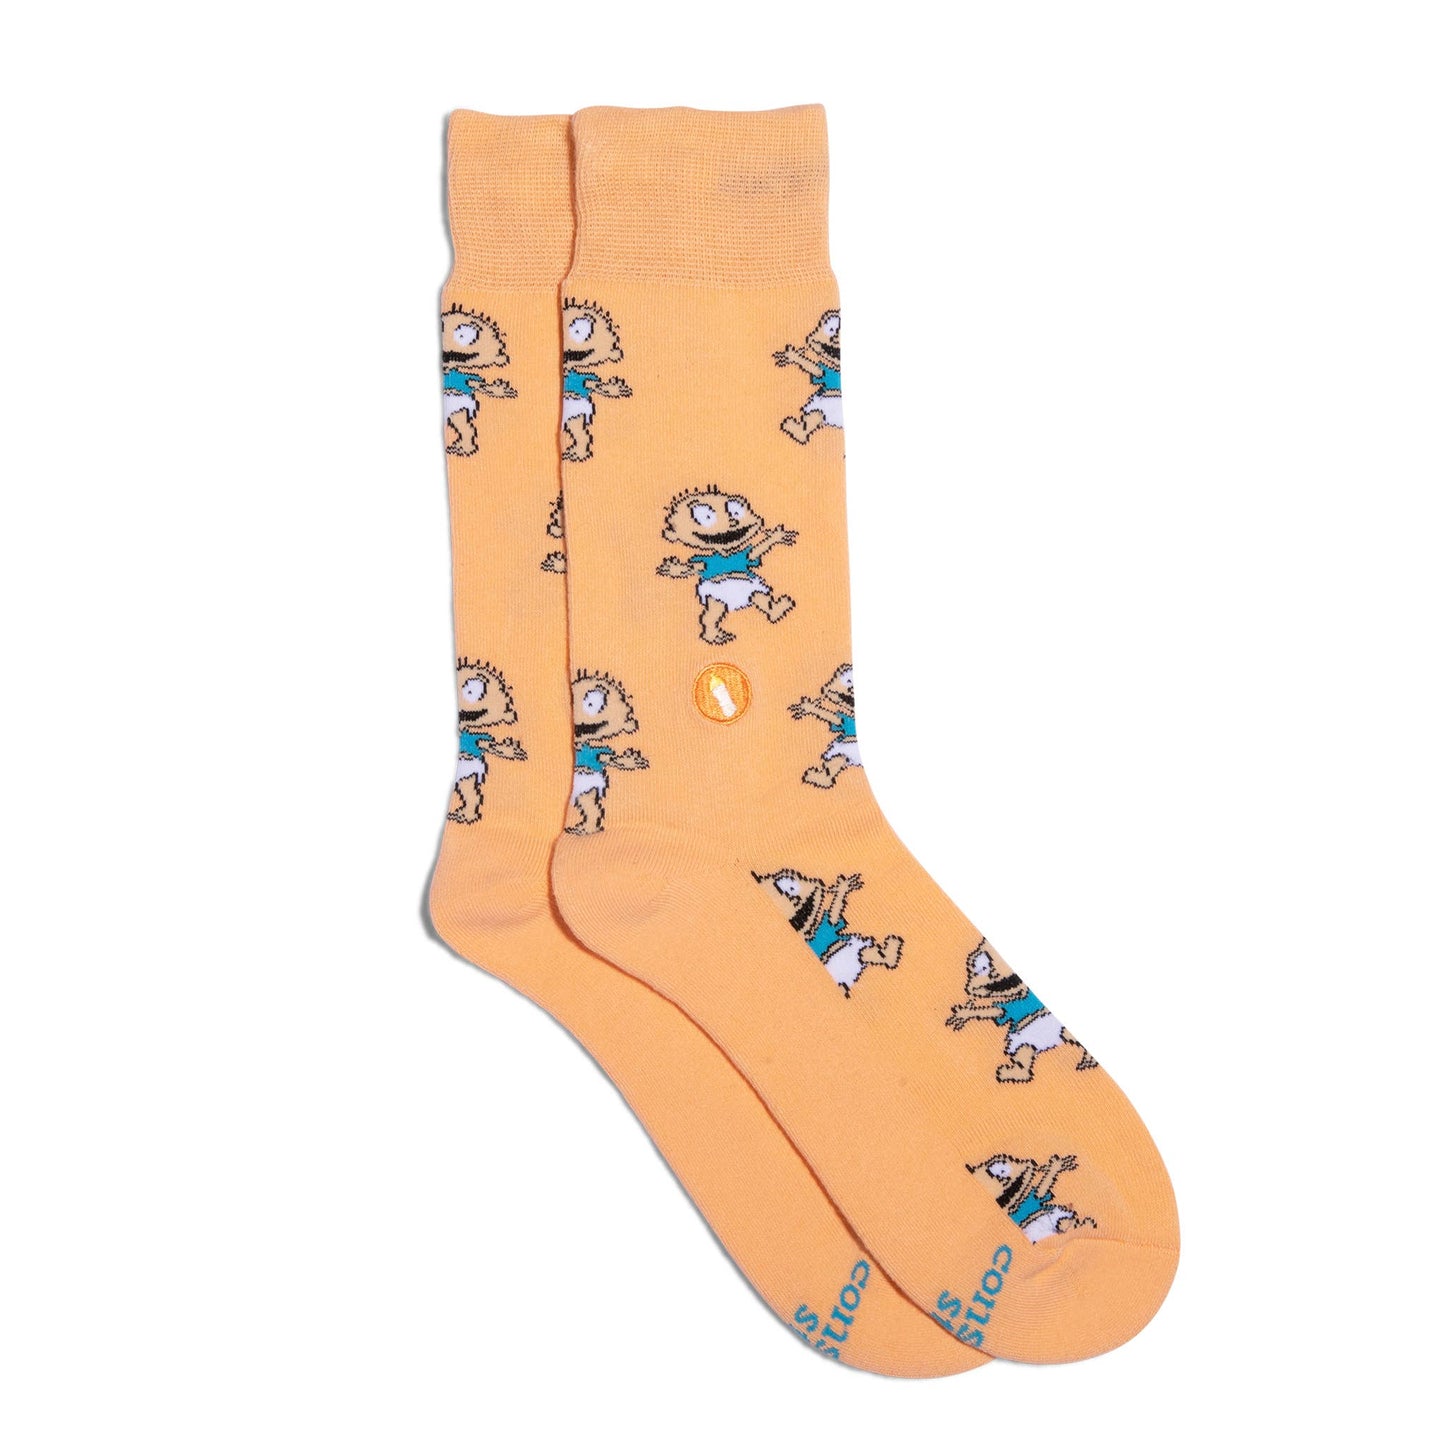 Conscious Step - Rugrats Socks that Find a Cure (Orange Tommy Pickles)  Conscious Step Medium  -better made easy-eco-friendly-sustainable-gifting